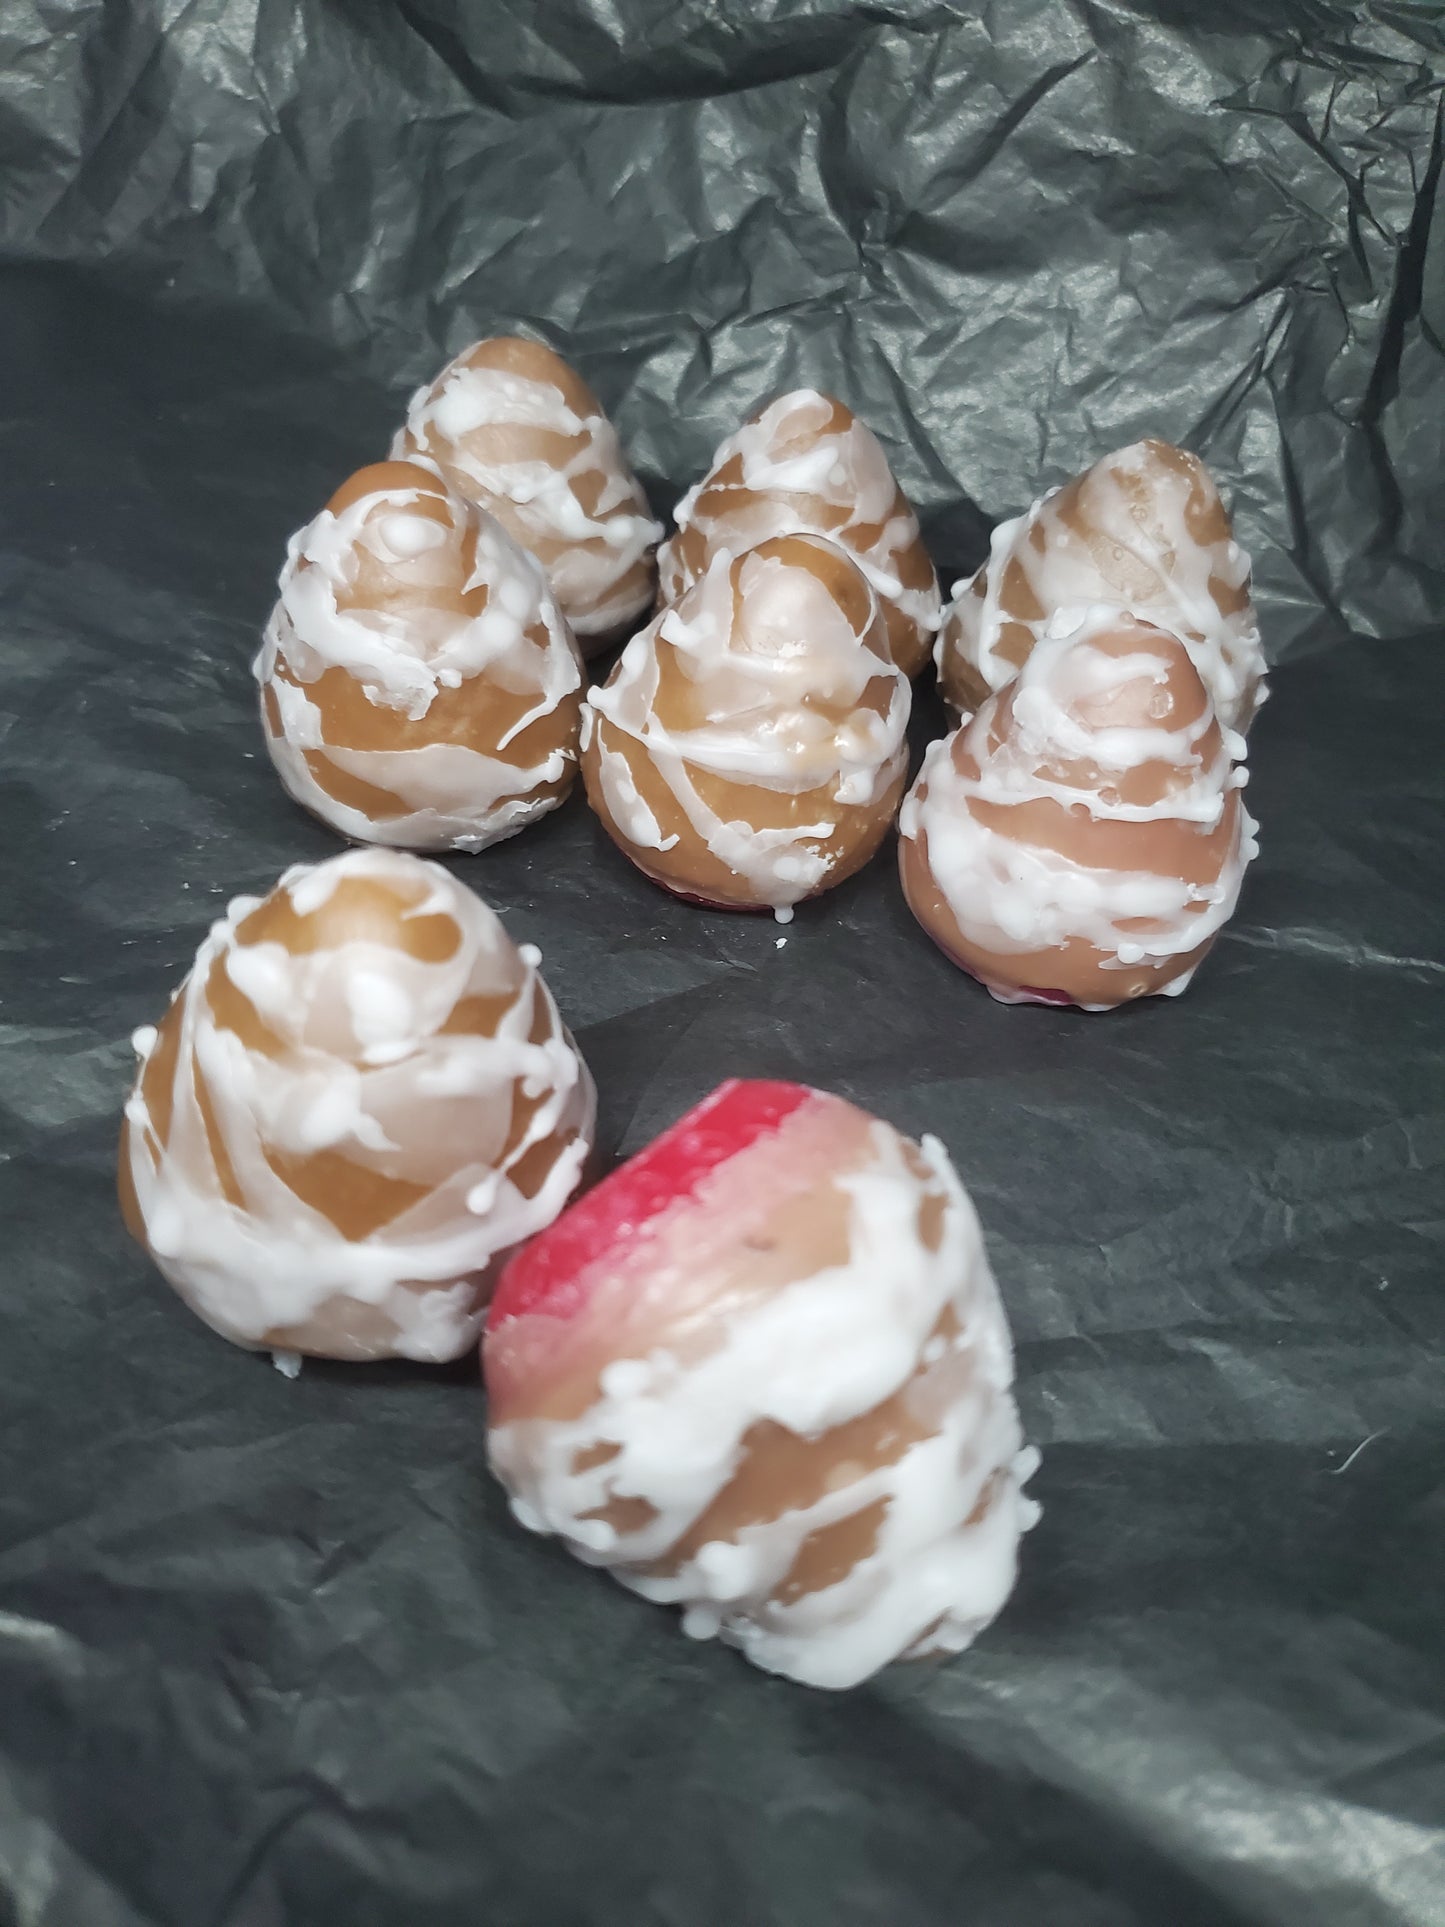 Milk Chocolate Dipped Stawberries with vinalla creme drizzle wax melts